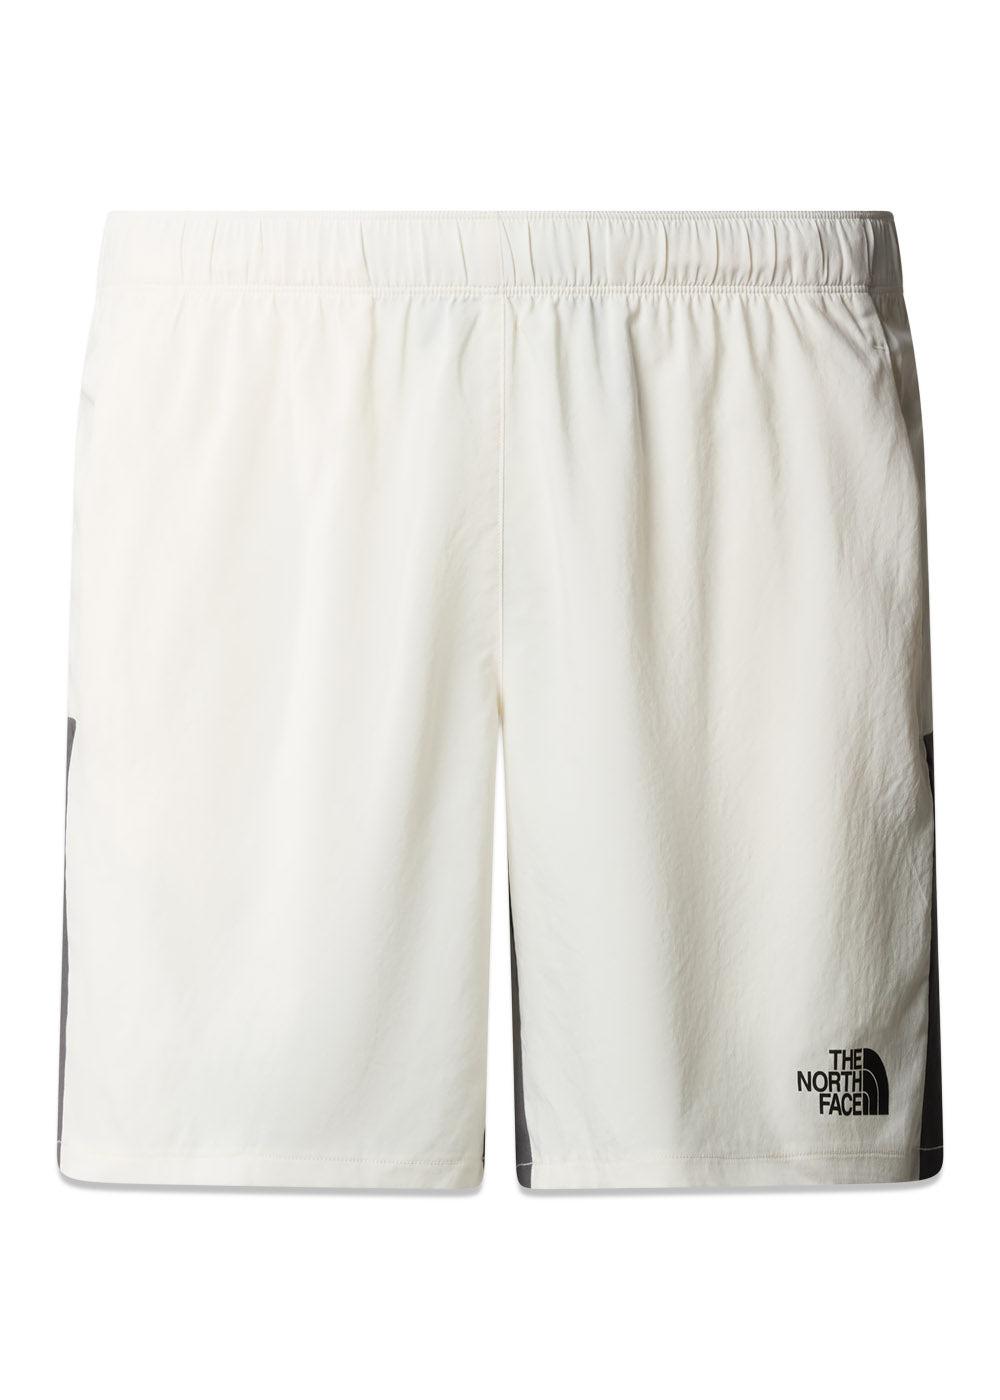 MA woven shorts - White Dune / Anthracite Grey